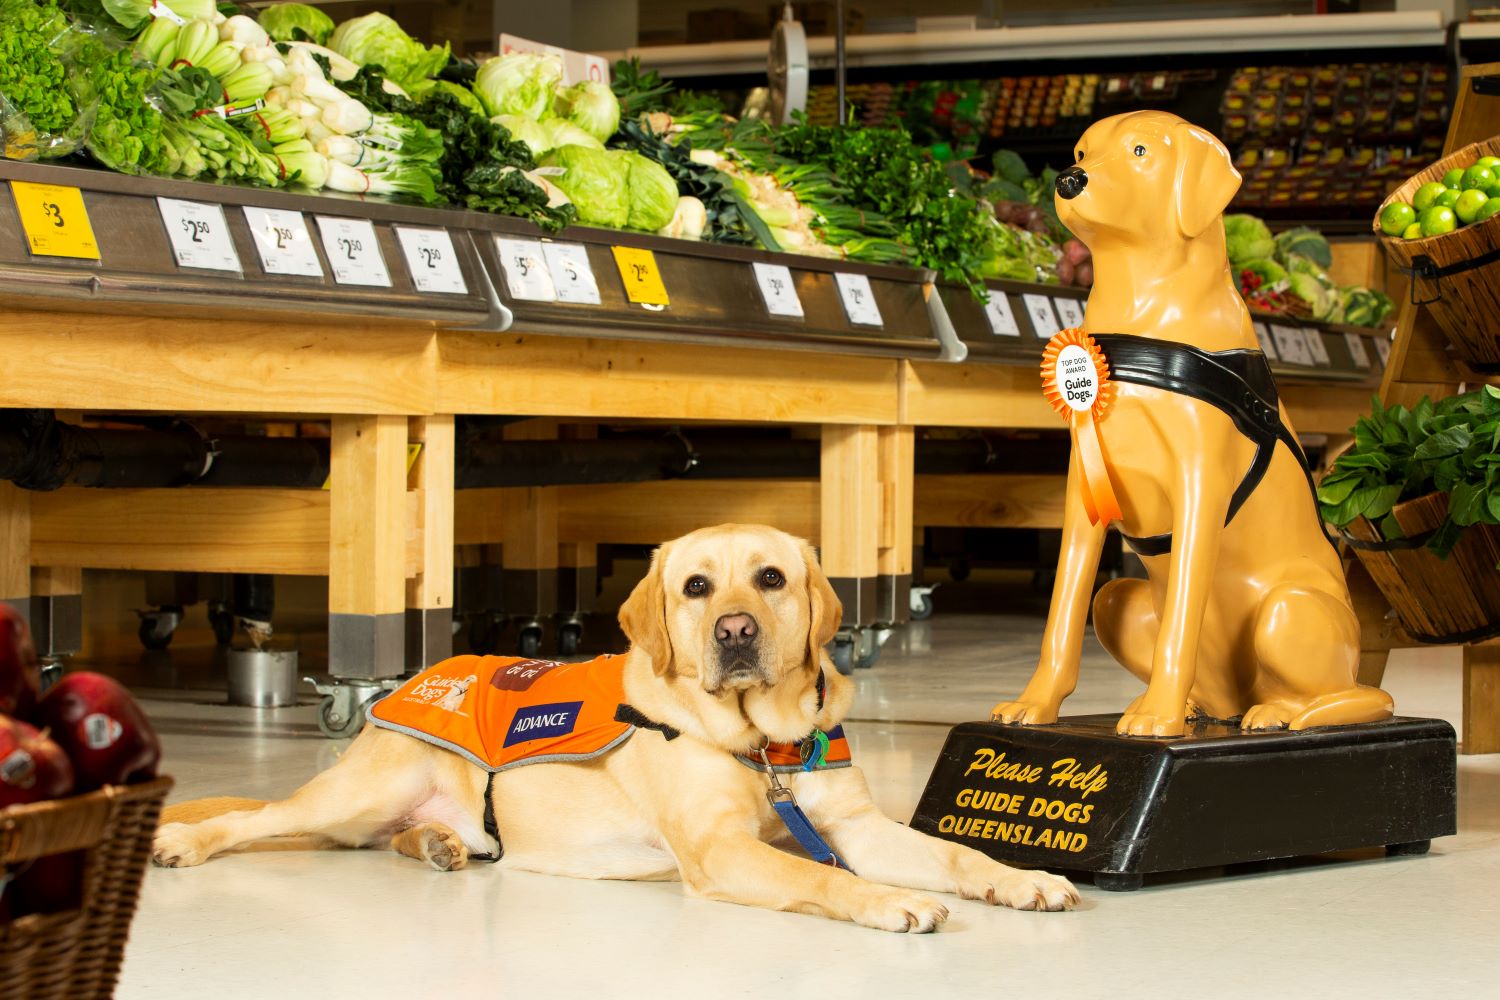 Guide Dogs Trainee Support Dog Yaden with one of Australia's Top Dogs at Coles Miami, QLD